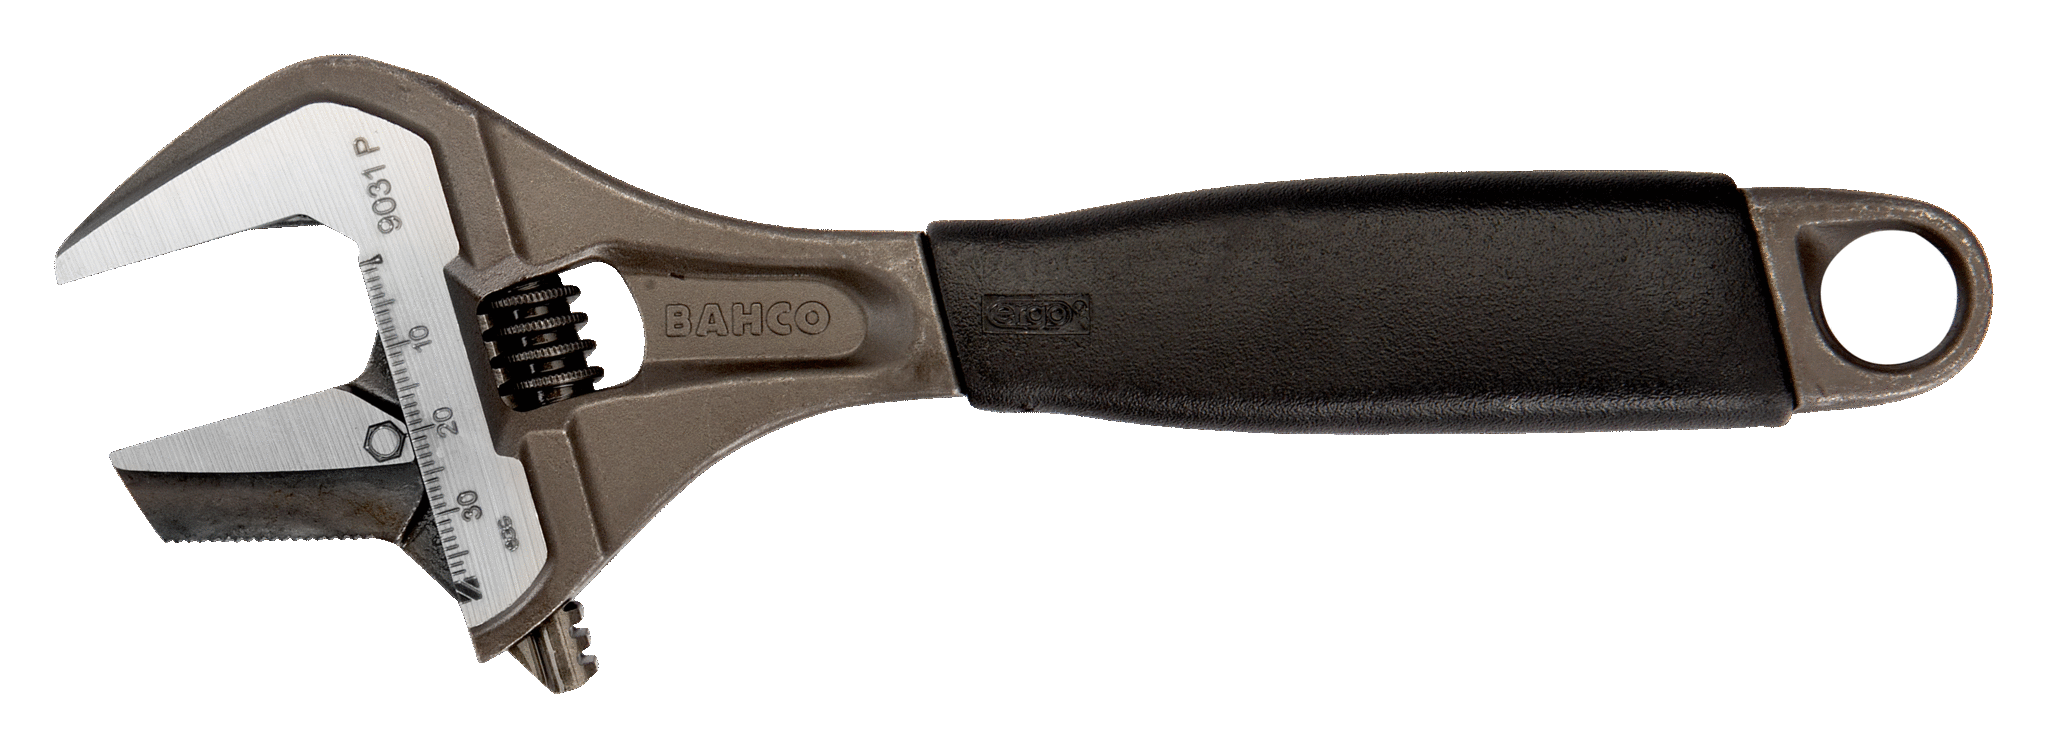 Reversible Extra Wide Opening Jaw Adjustable Wrench with Rubber Handle - 9031P by Bahco